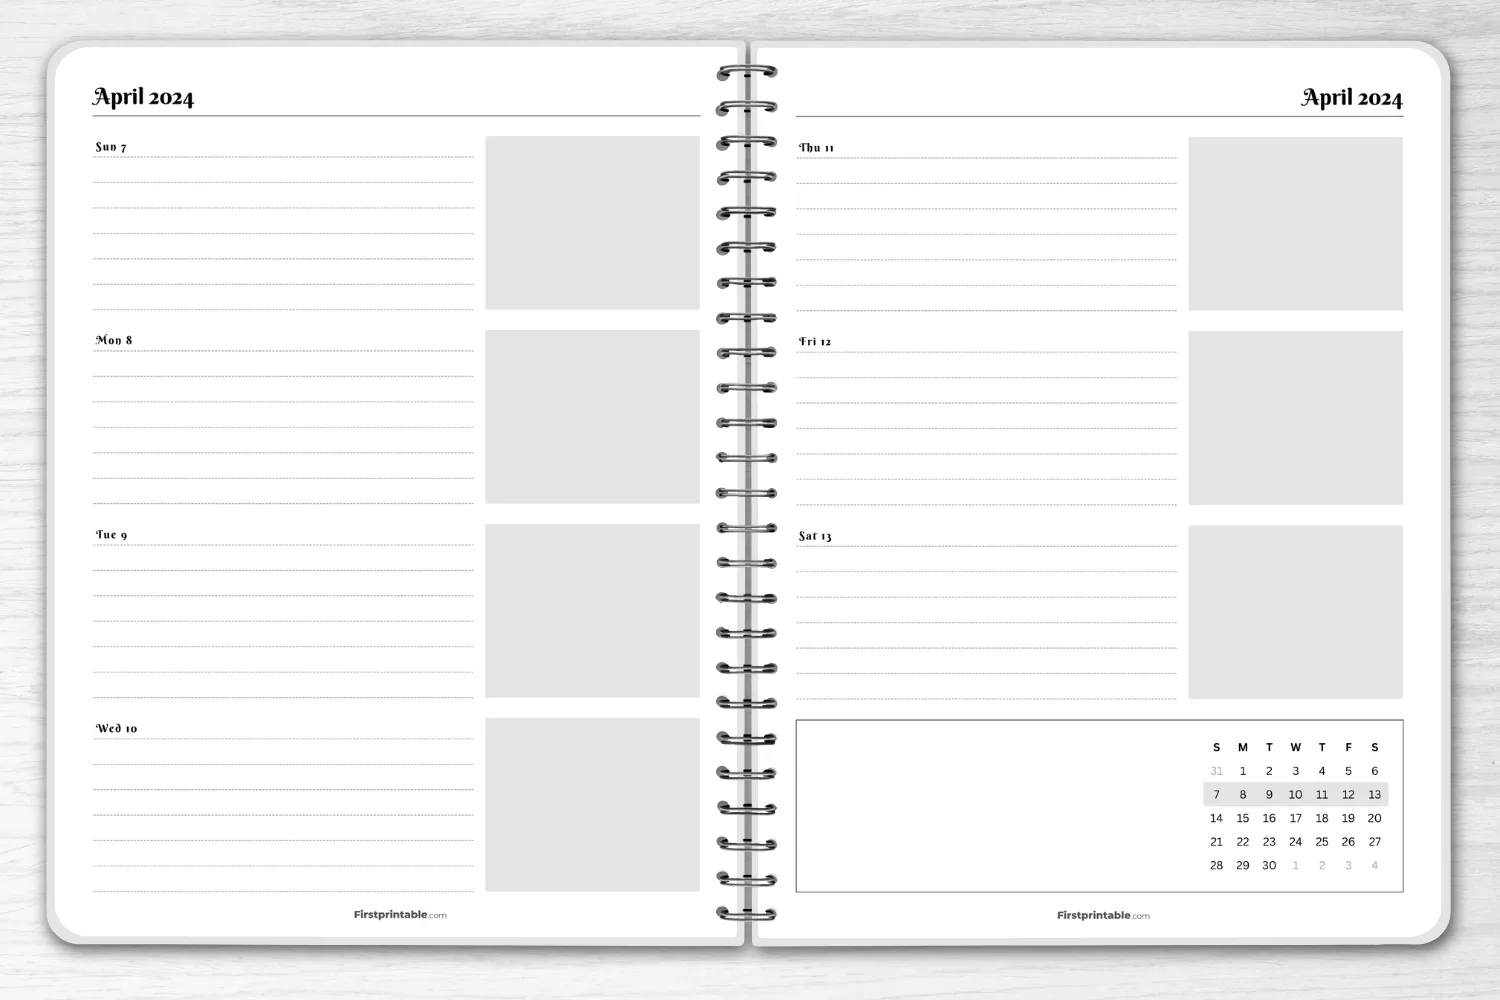 Free Minimalist Weekly Planner with Dates - April 2024